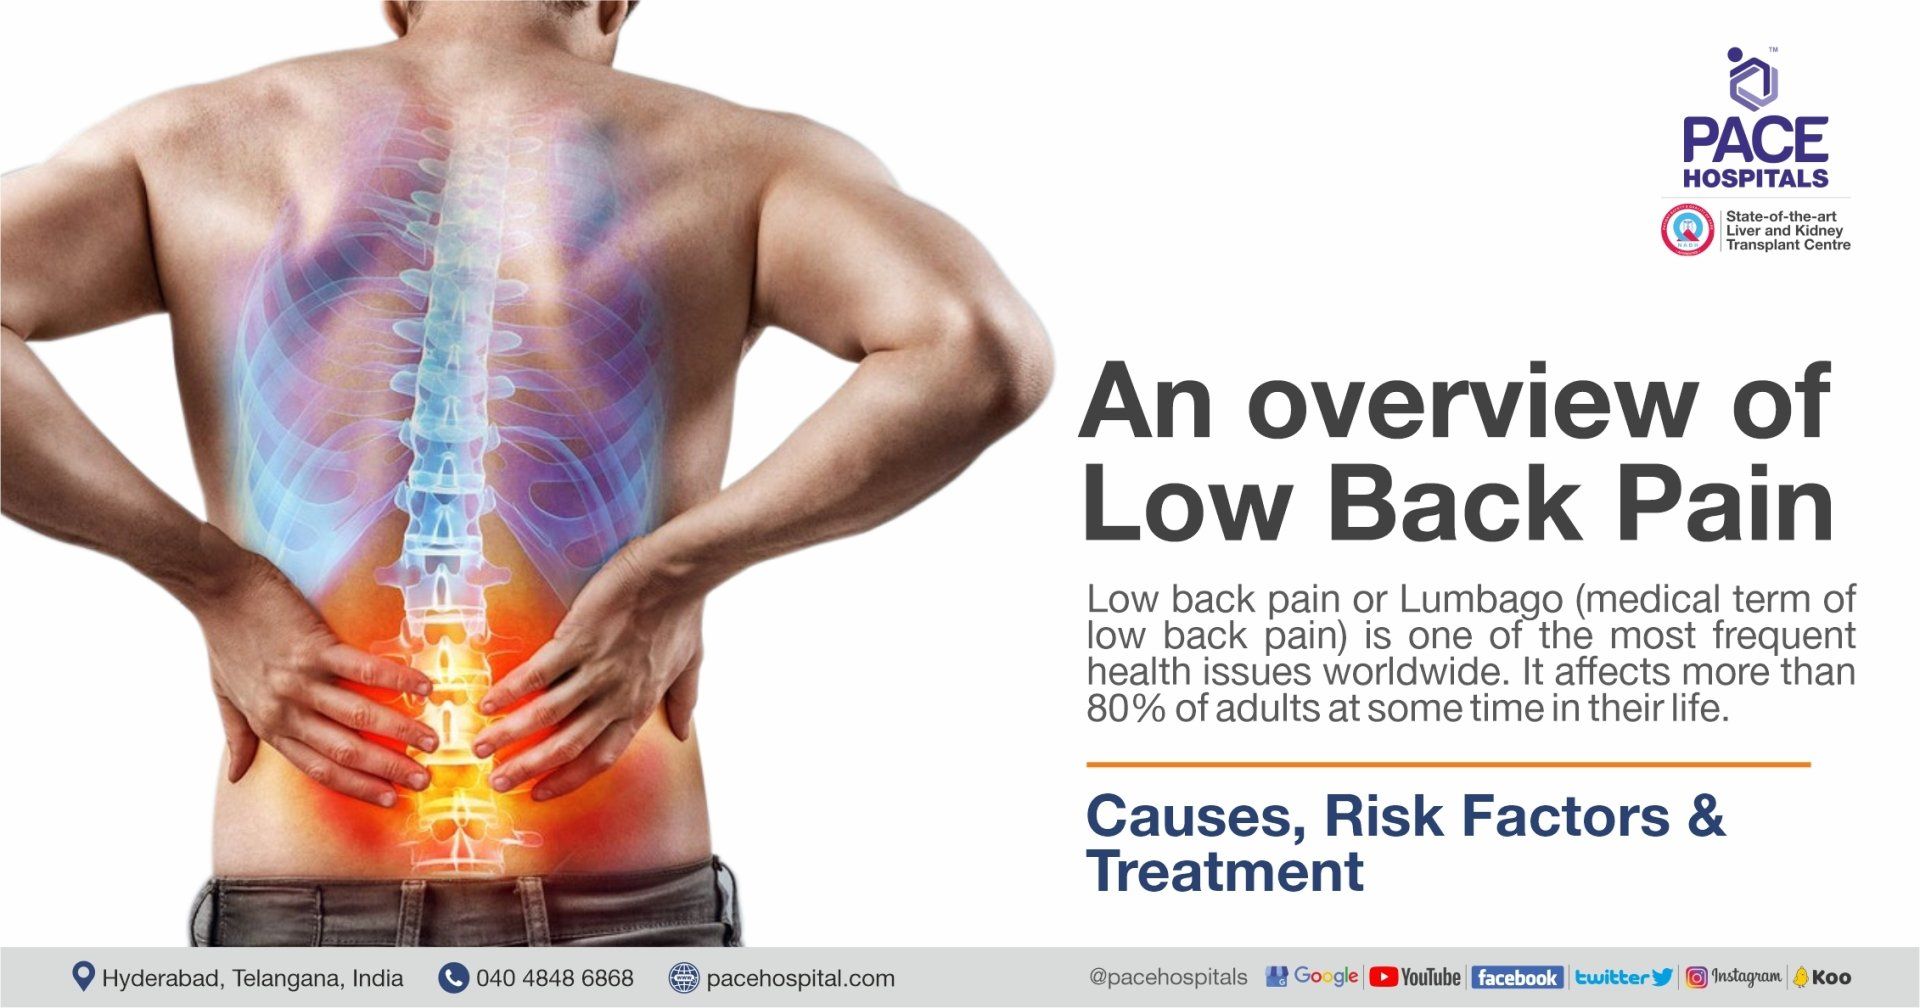 An overview of Low Back Pain | Causes, Risk Factors and Treatment